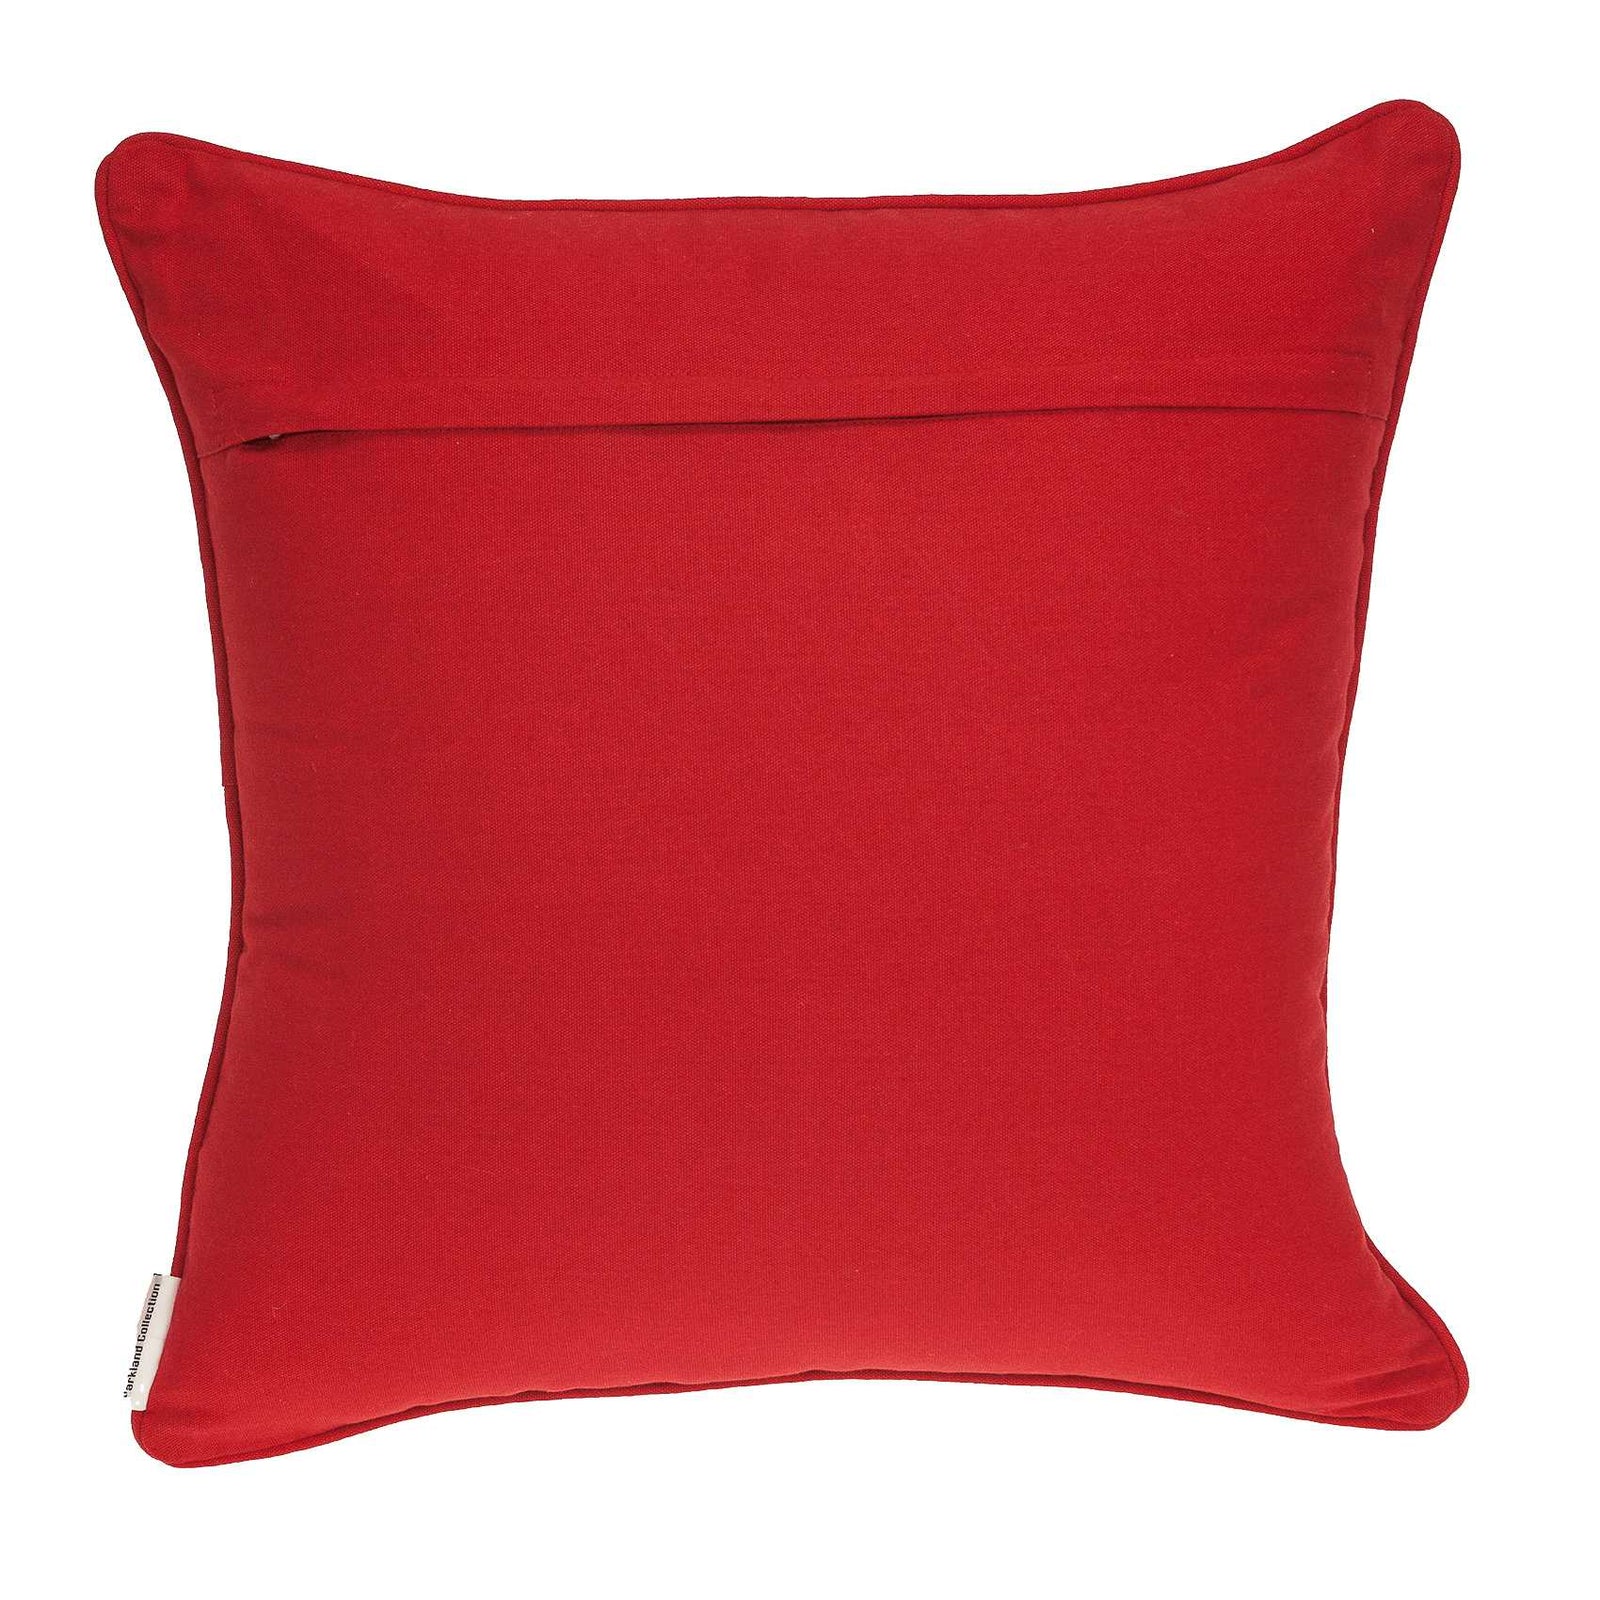 20" X 7" X 20" Transitional Red And White Cotton Pillow Cover With Poly Insert